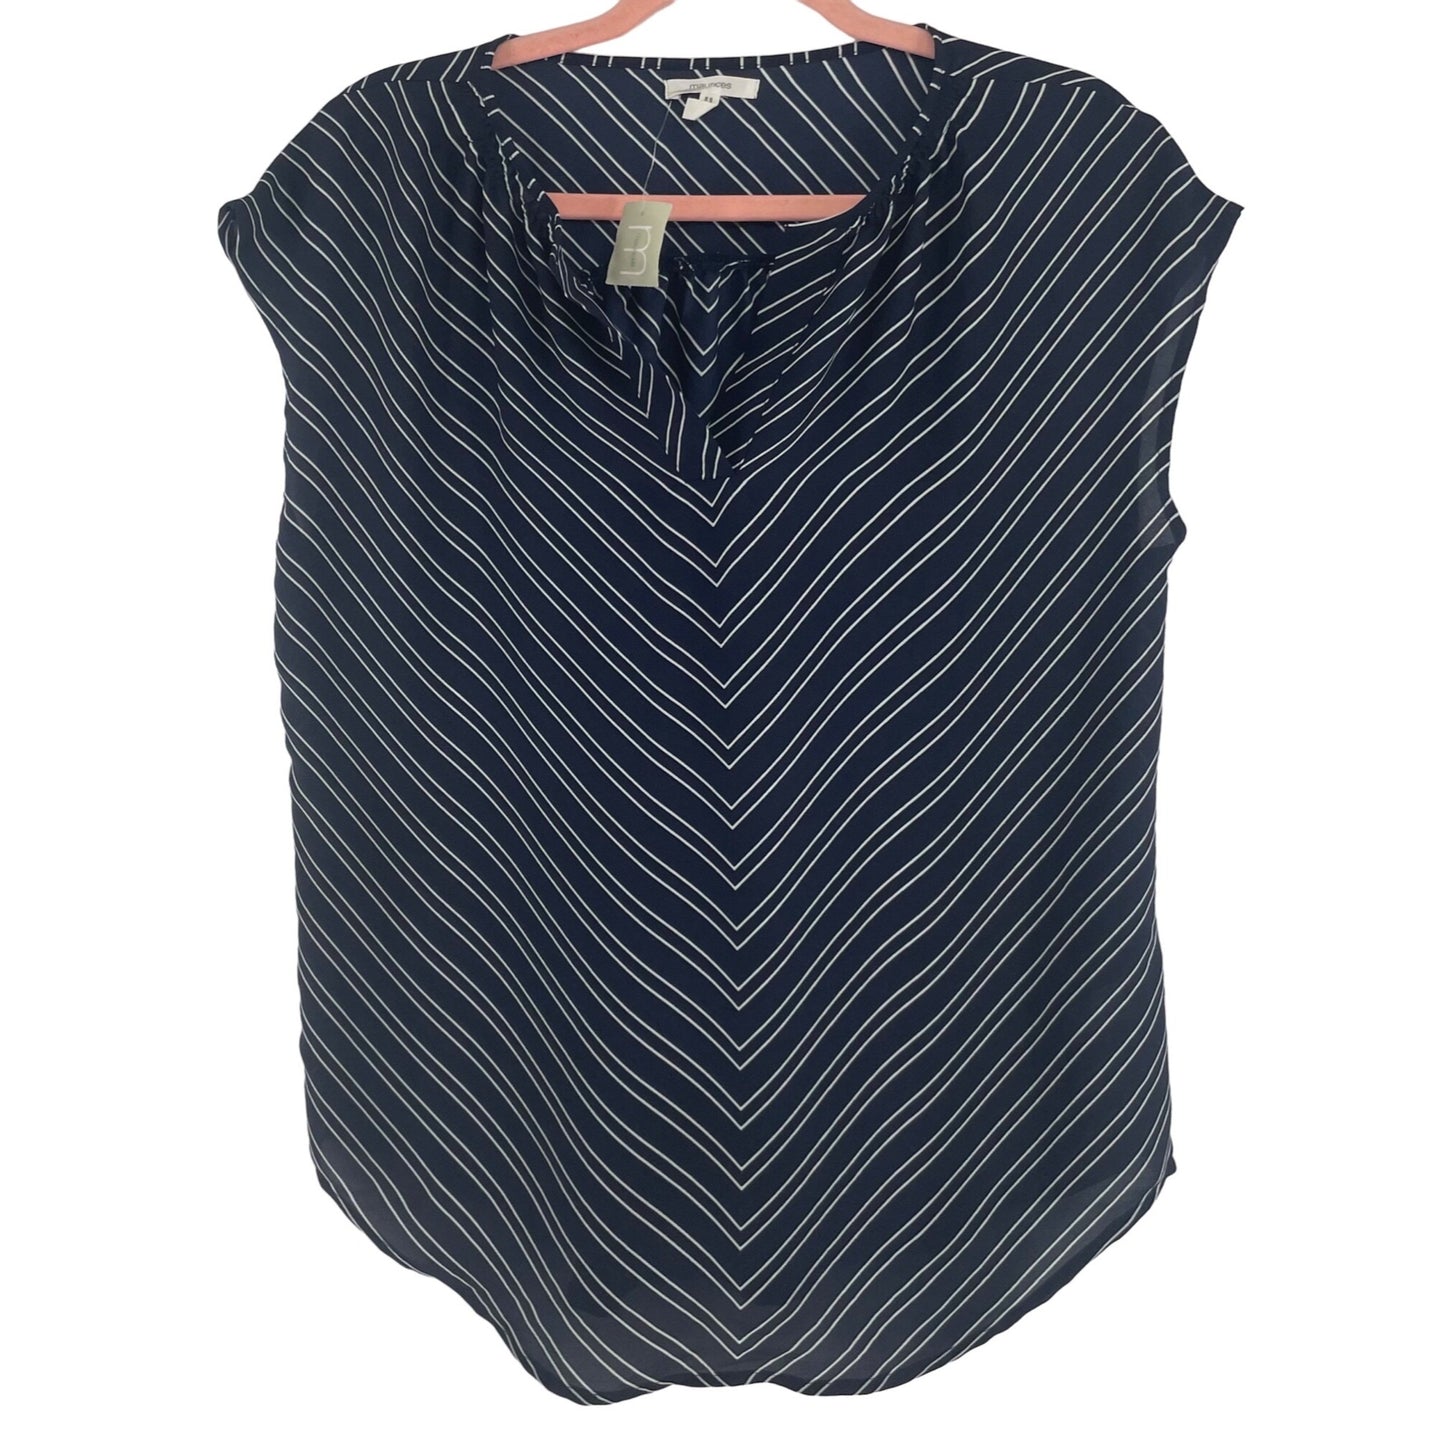 NWT Maurices Women's Size Small Navy & White Striped Short-Sleeved V-Neck Top